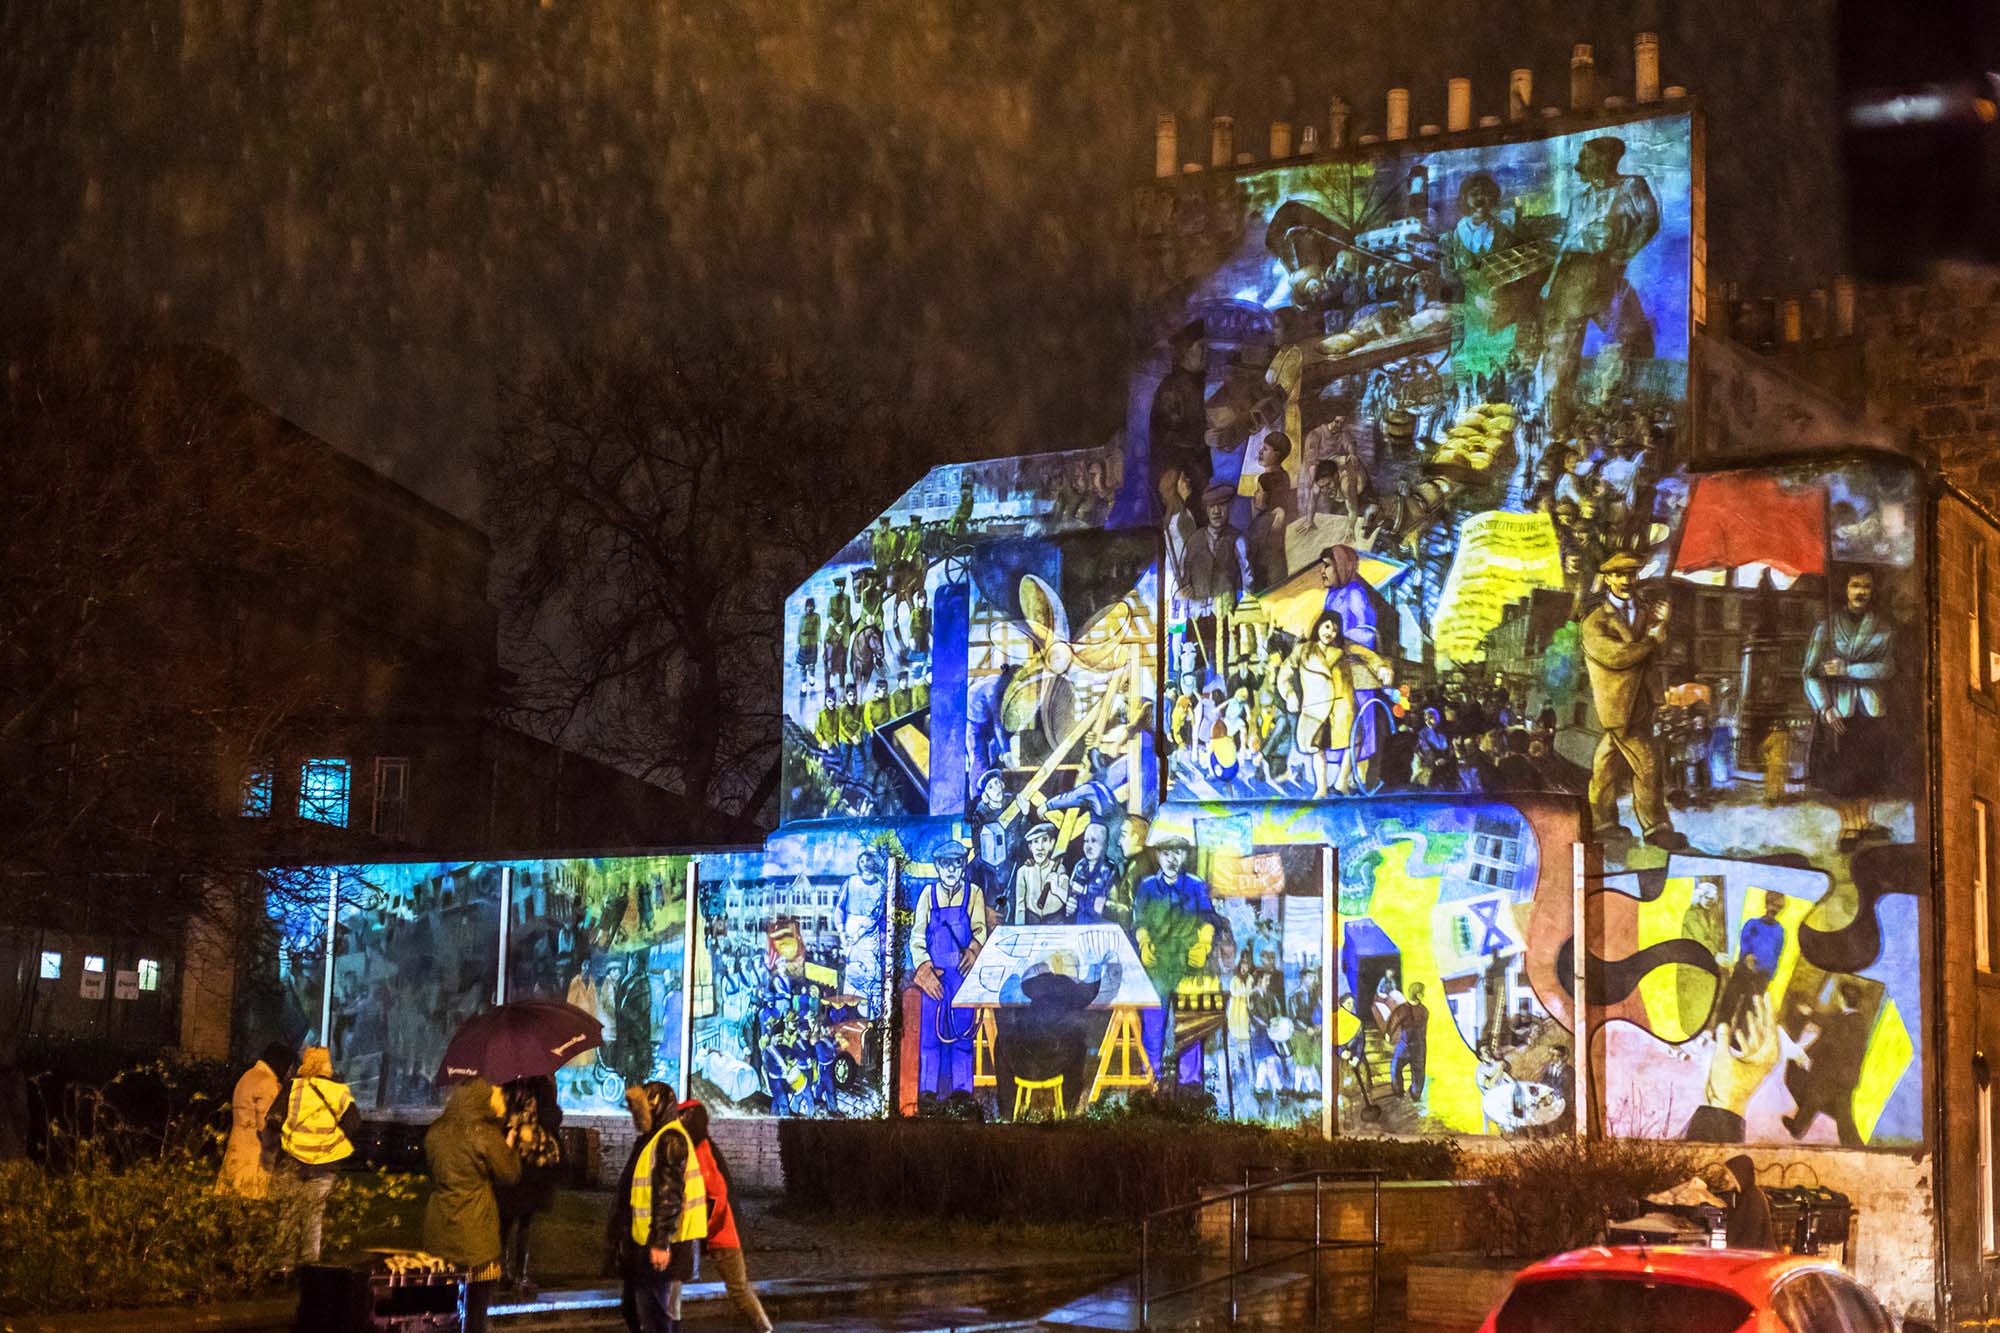 leith mural projection in full